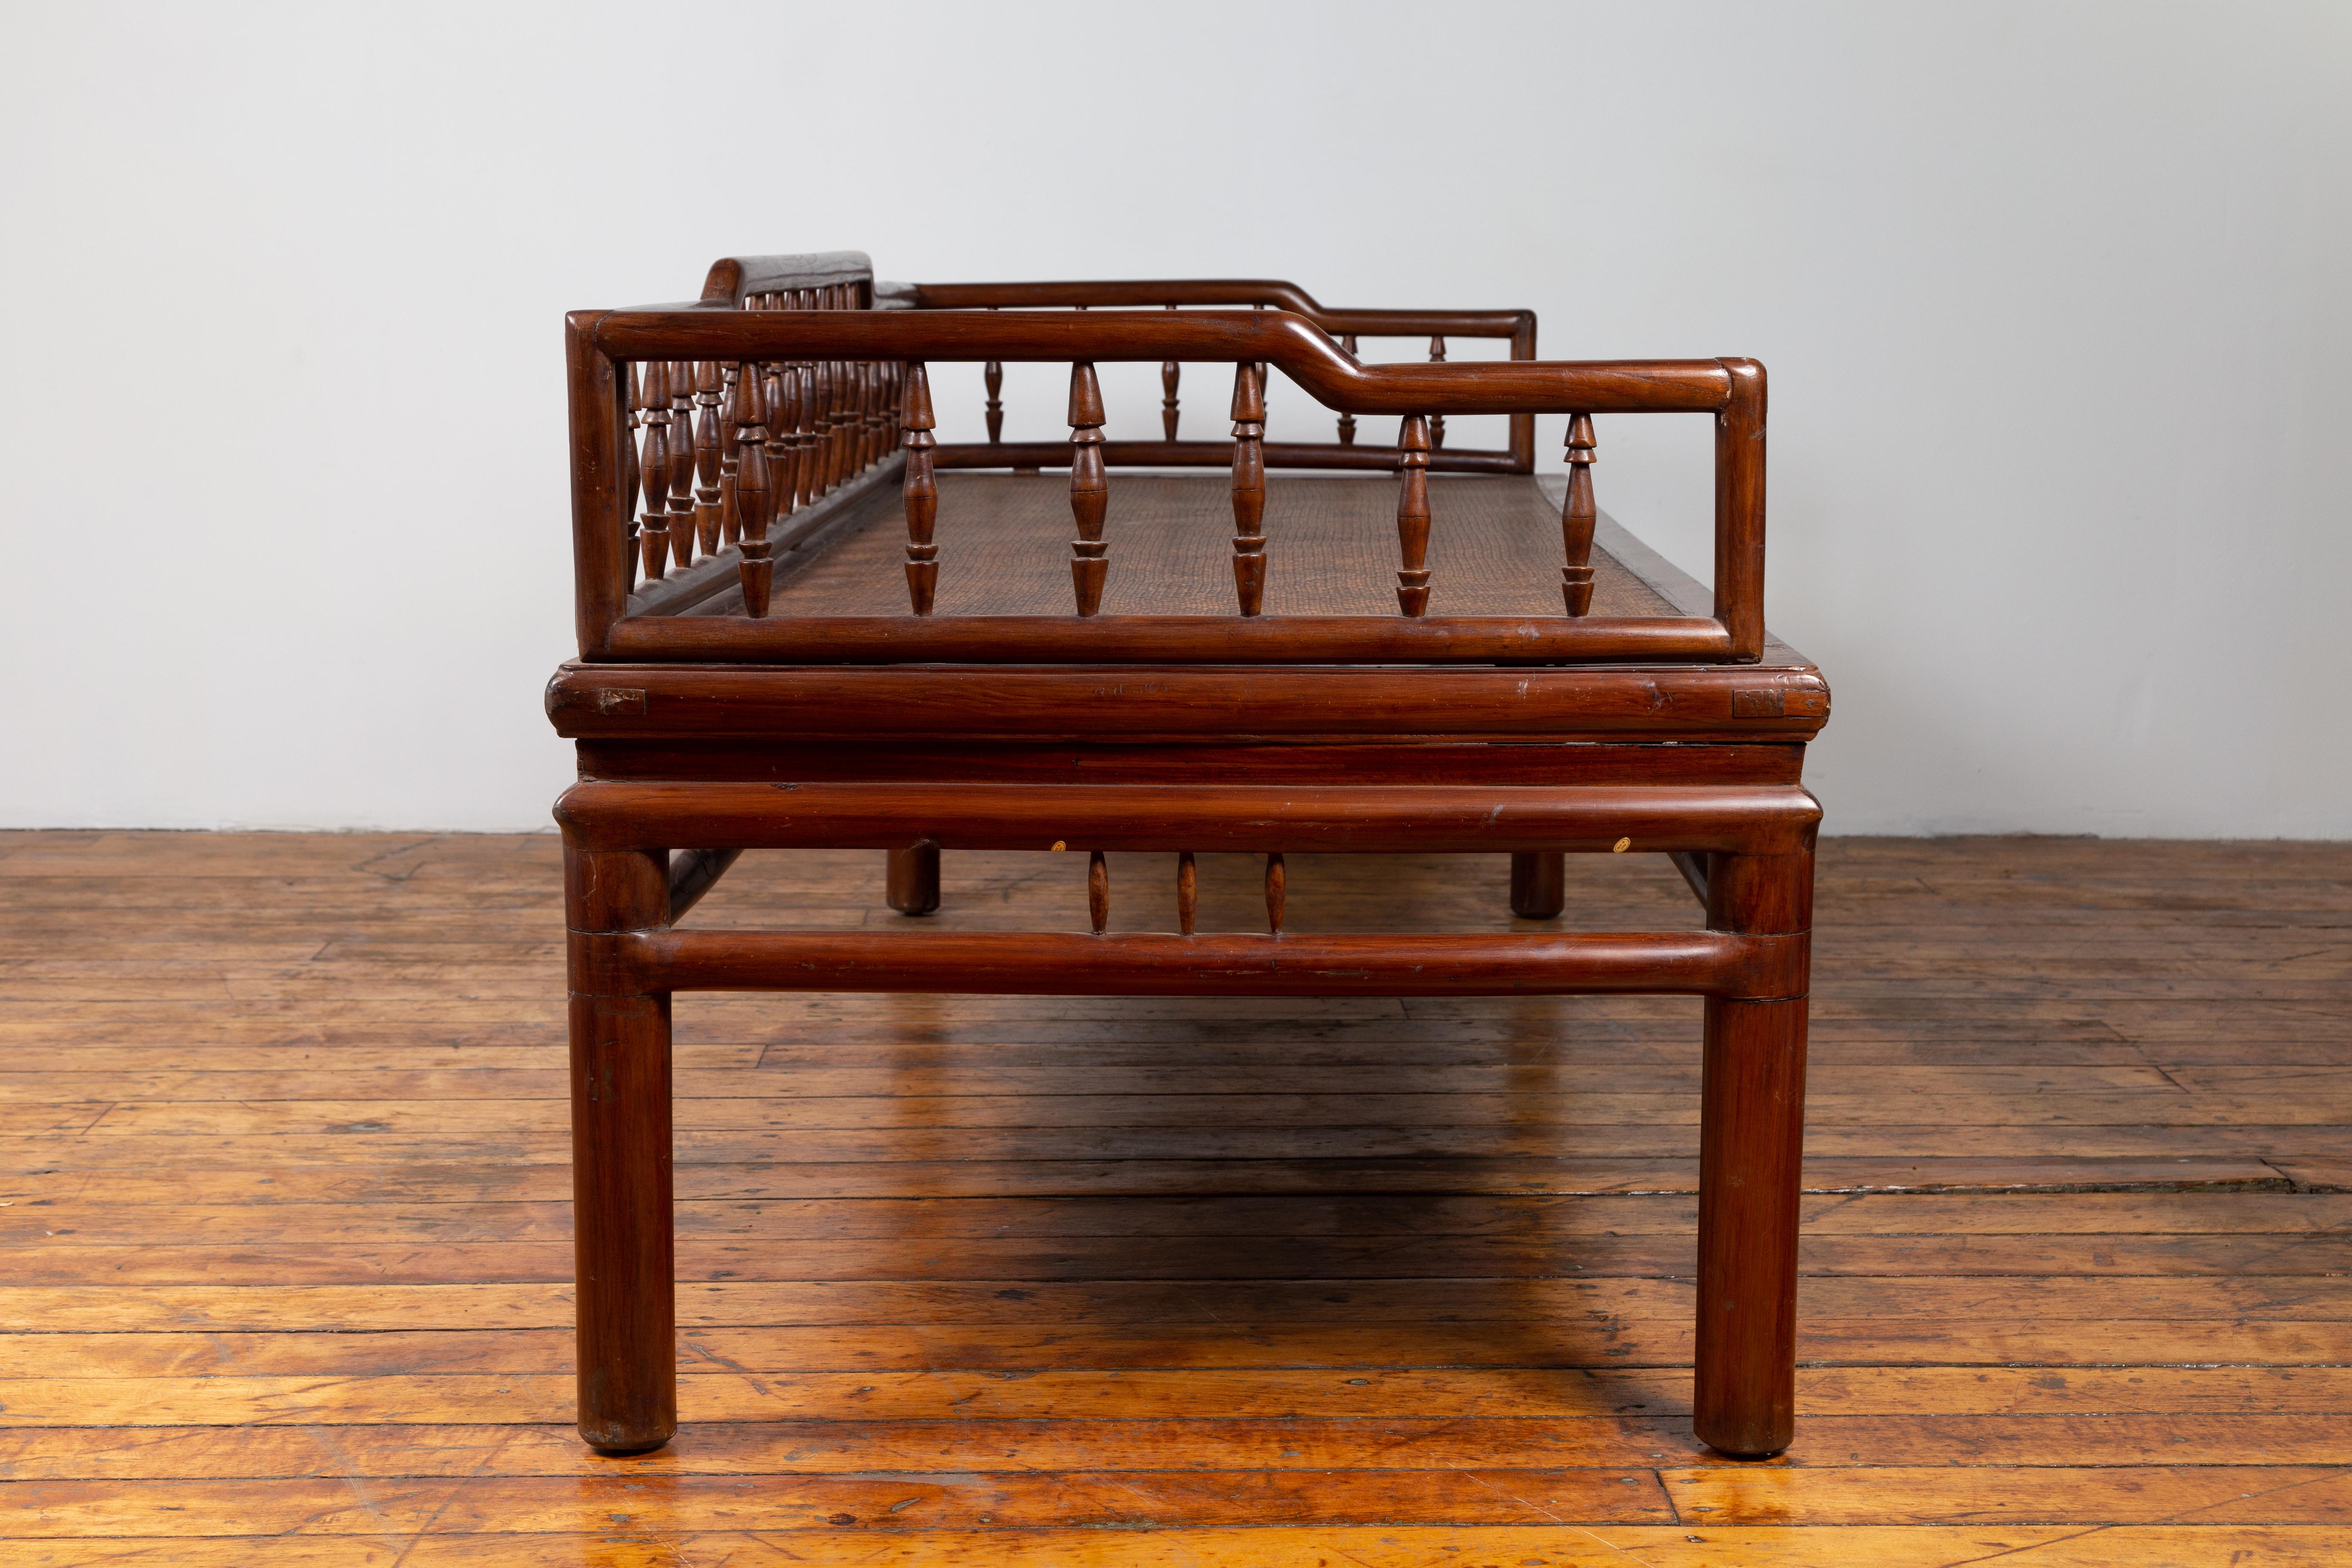 Chinese Antique Wooden Daybed with Woven Rattan Seat and Spindle Accents 4